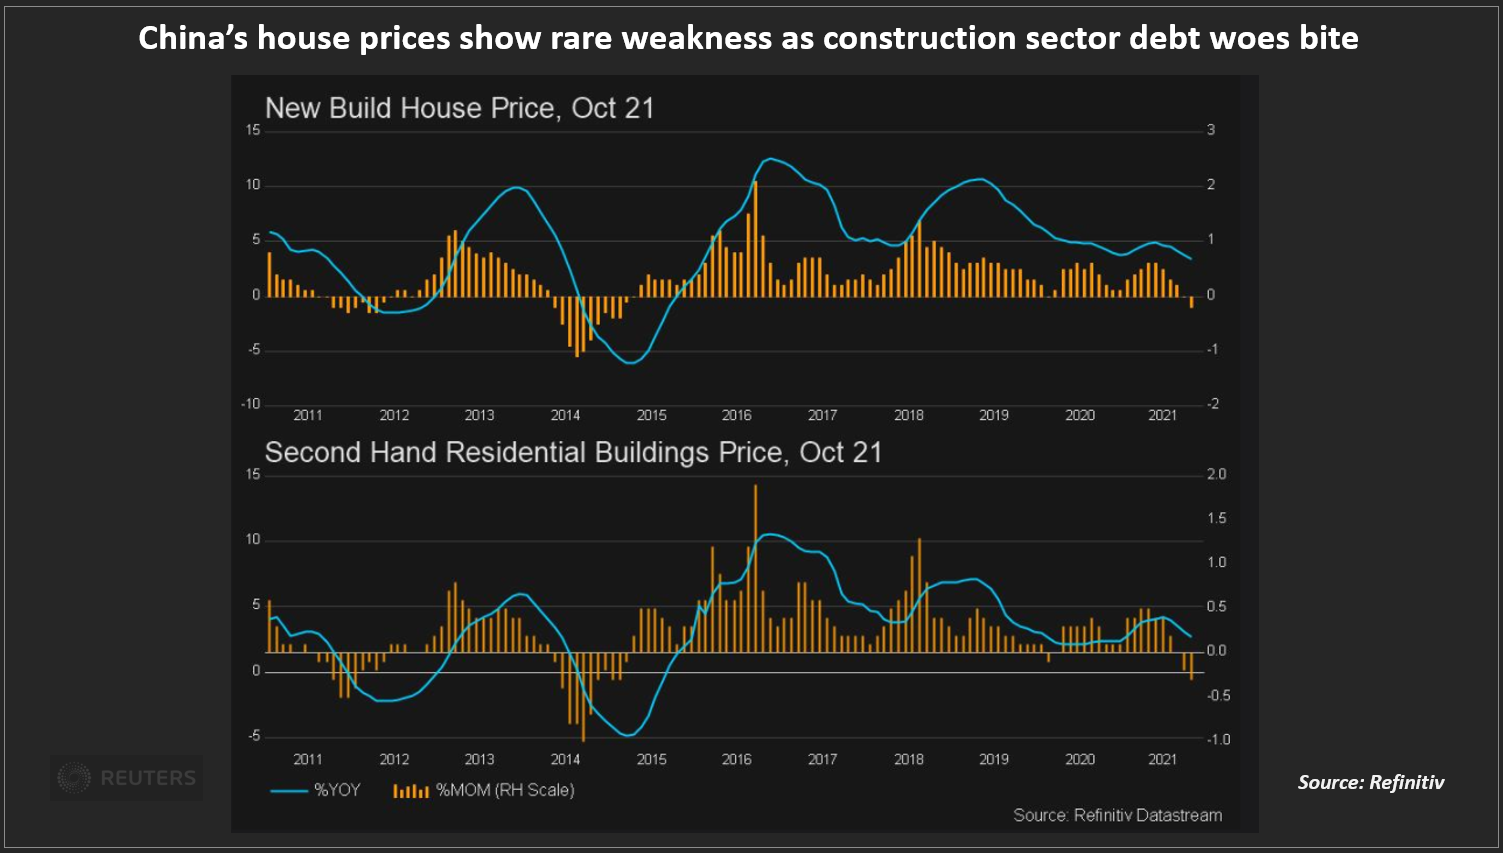 China’s house prices show rare weakness as construction sector debt woes bite